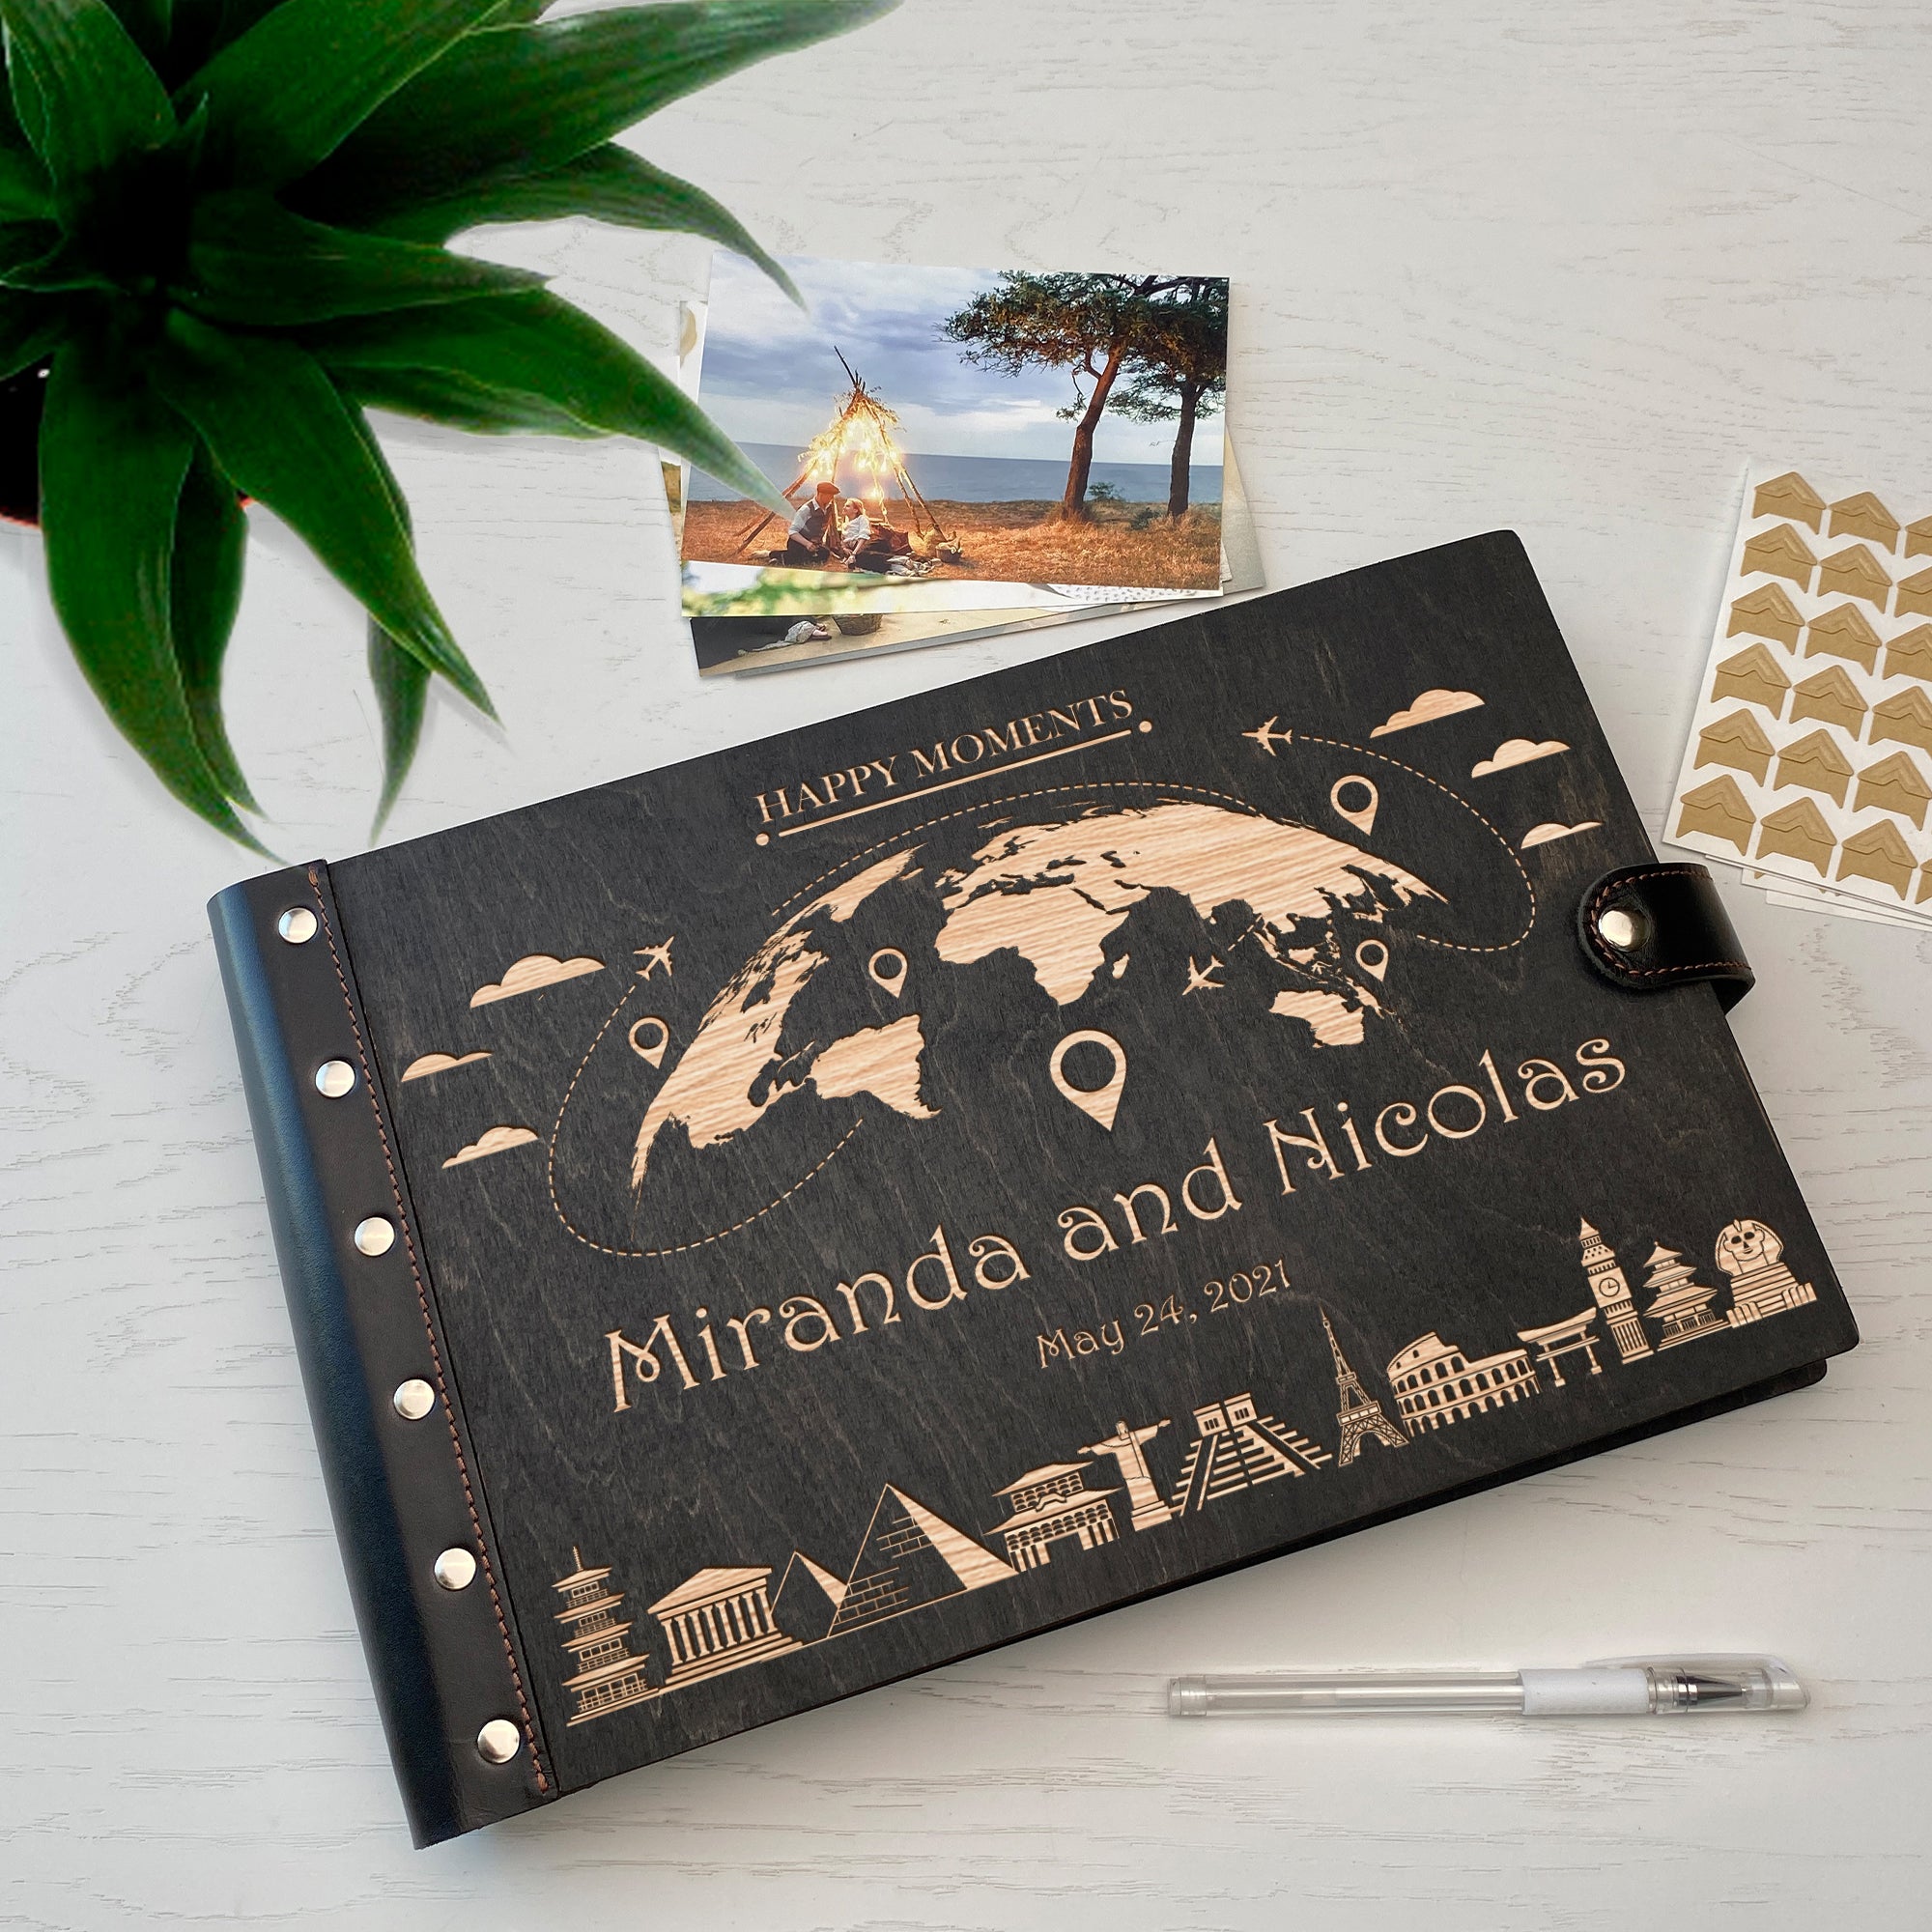 Personalized photo album with leather cover and Globe engraving